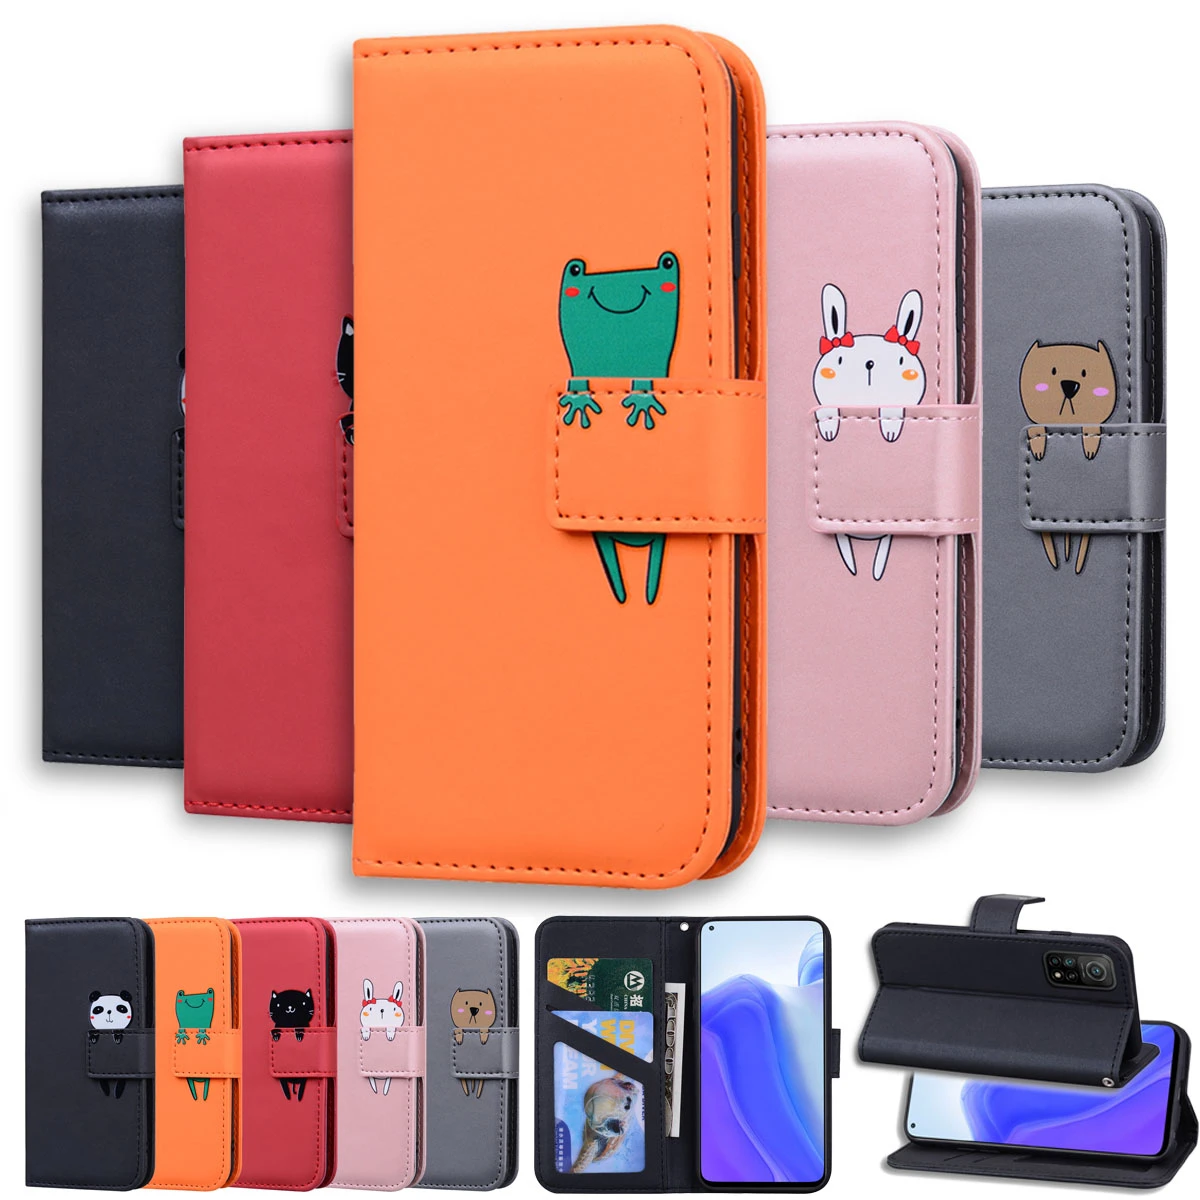 waterproof case for huawei Lovely Animal Flip Leather Phone Case For Huawei P20 P30 P40 Lite Pro P Smart Y6 Y7 2019 2020 Y5P Y6P Y7P Y8P Card Stand Cover phone case for huawei